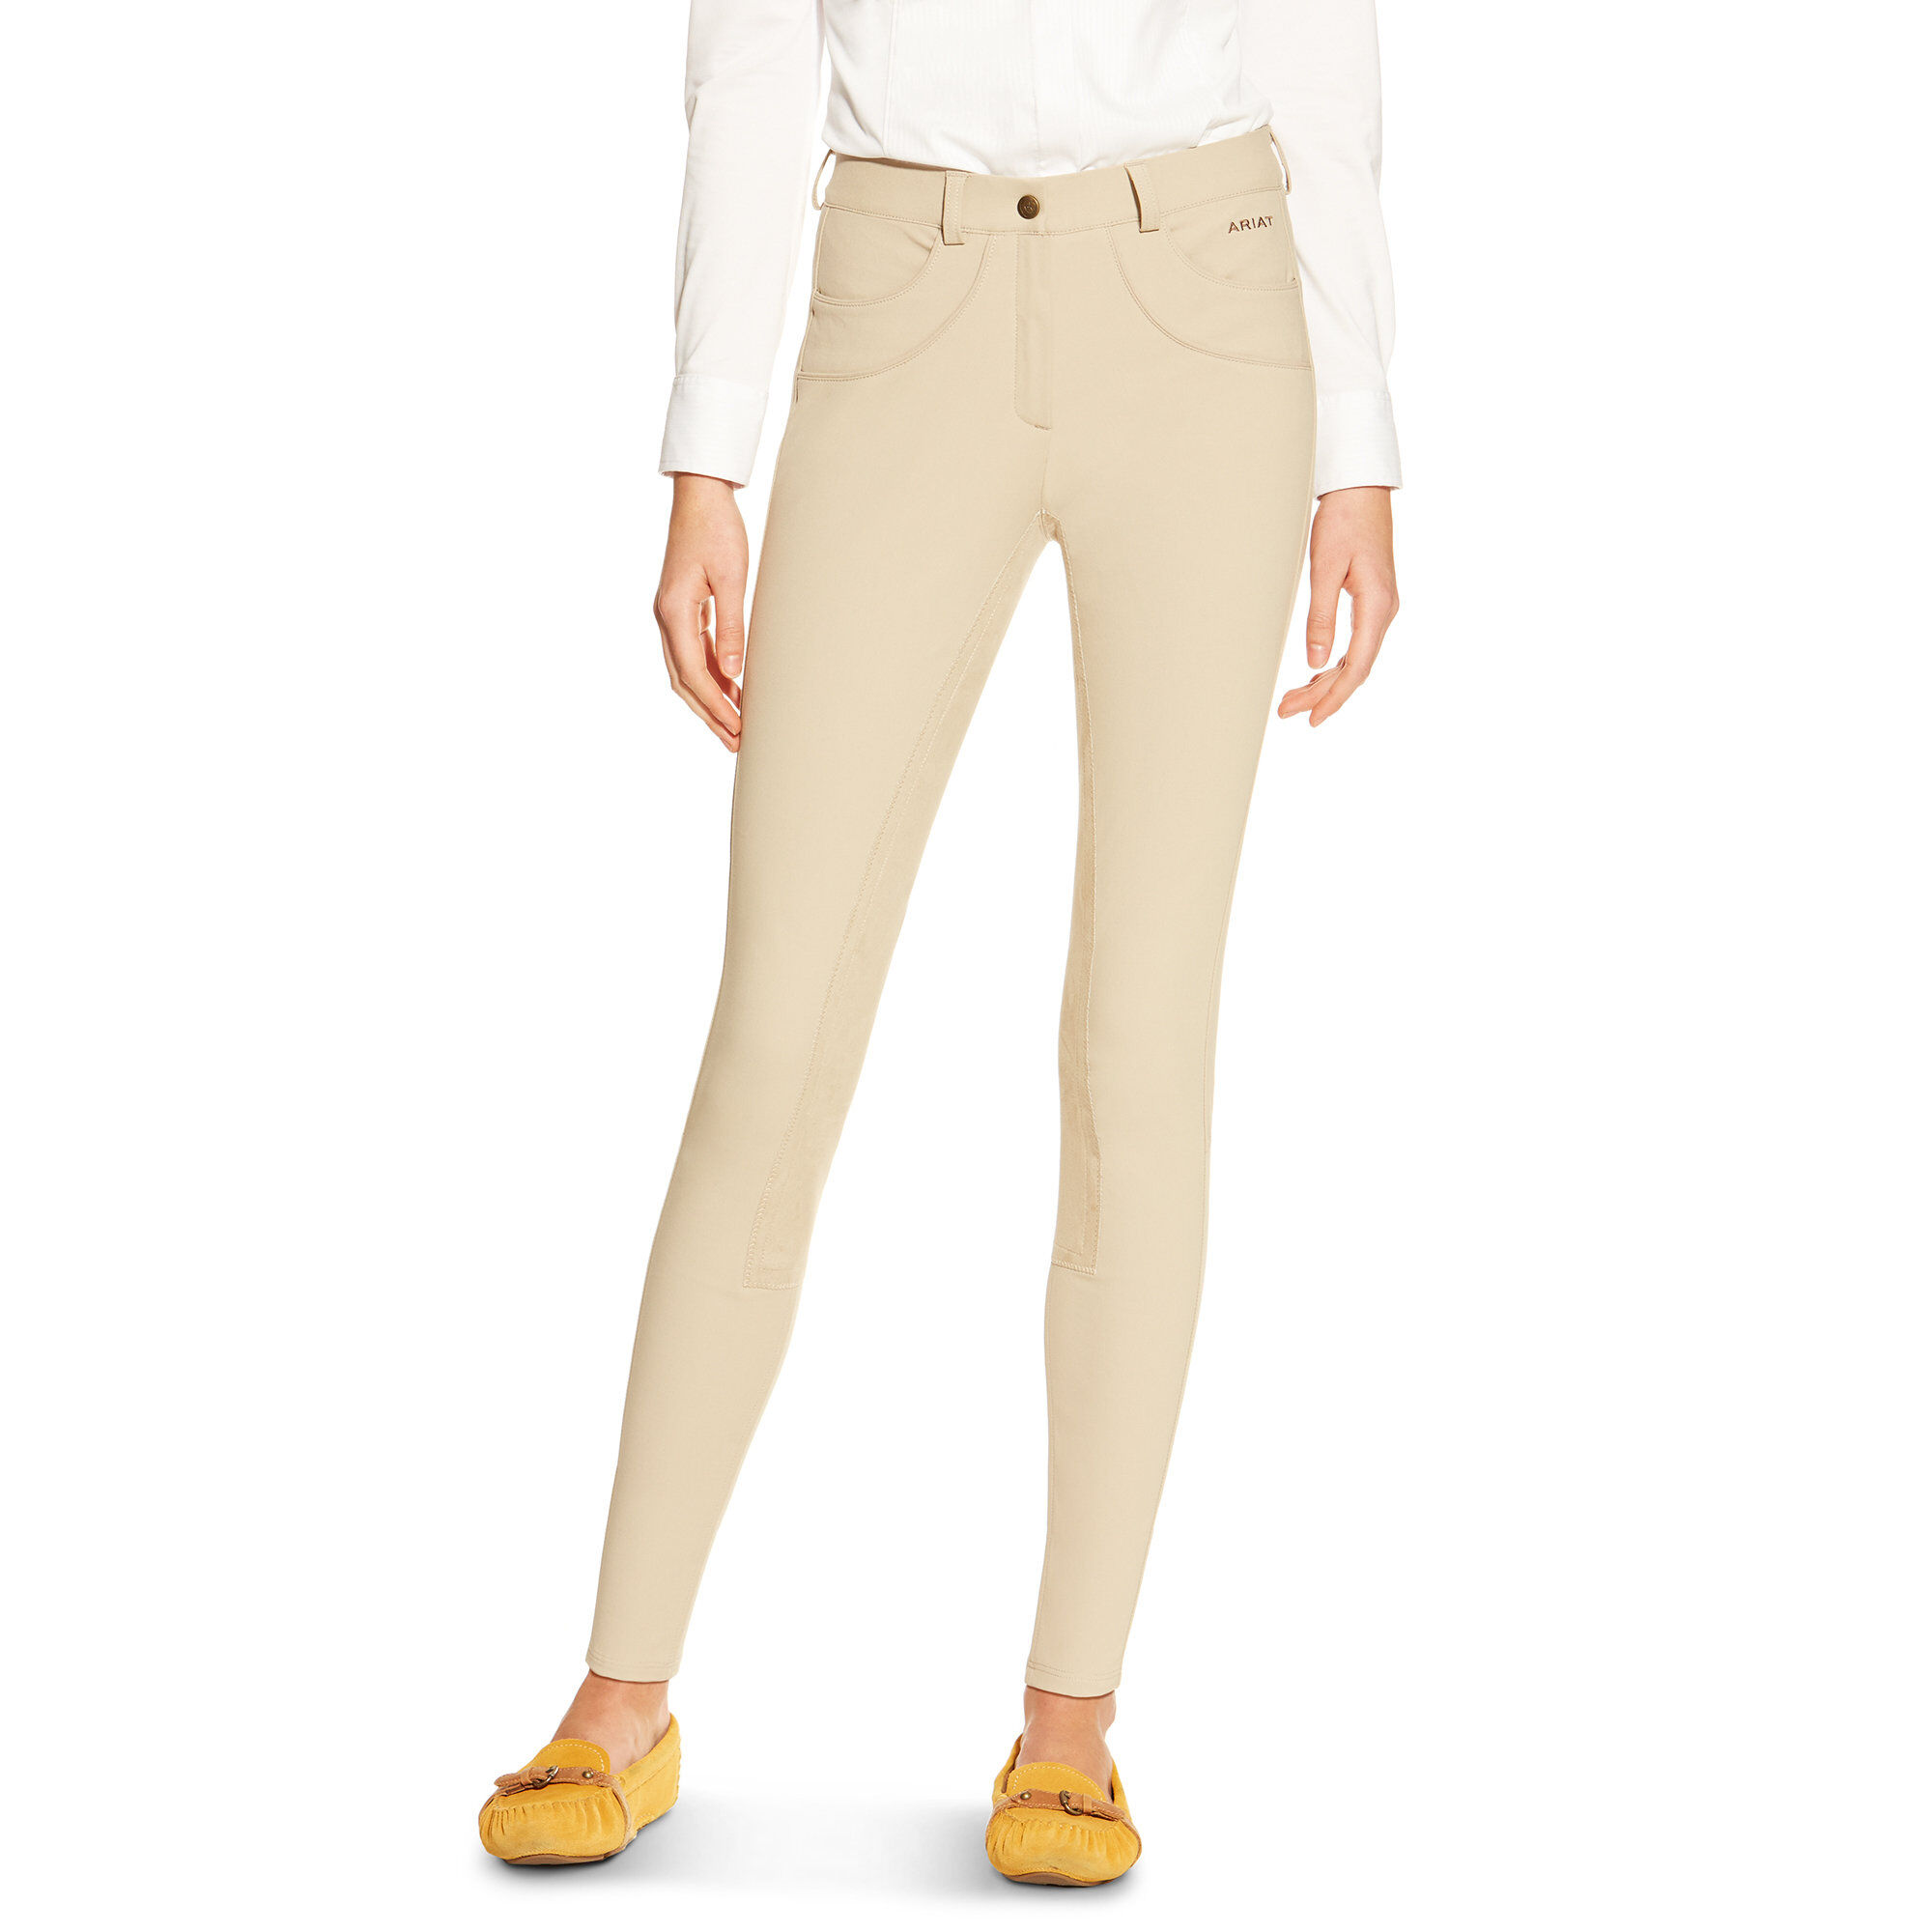 ariat olympia breeches sale